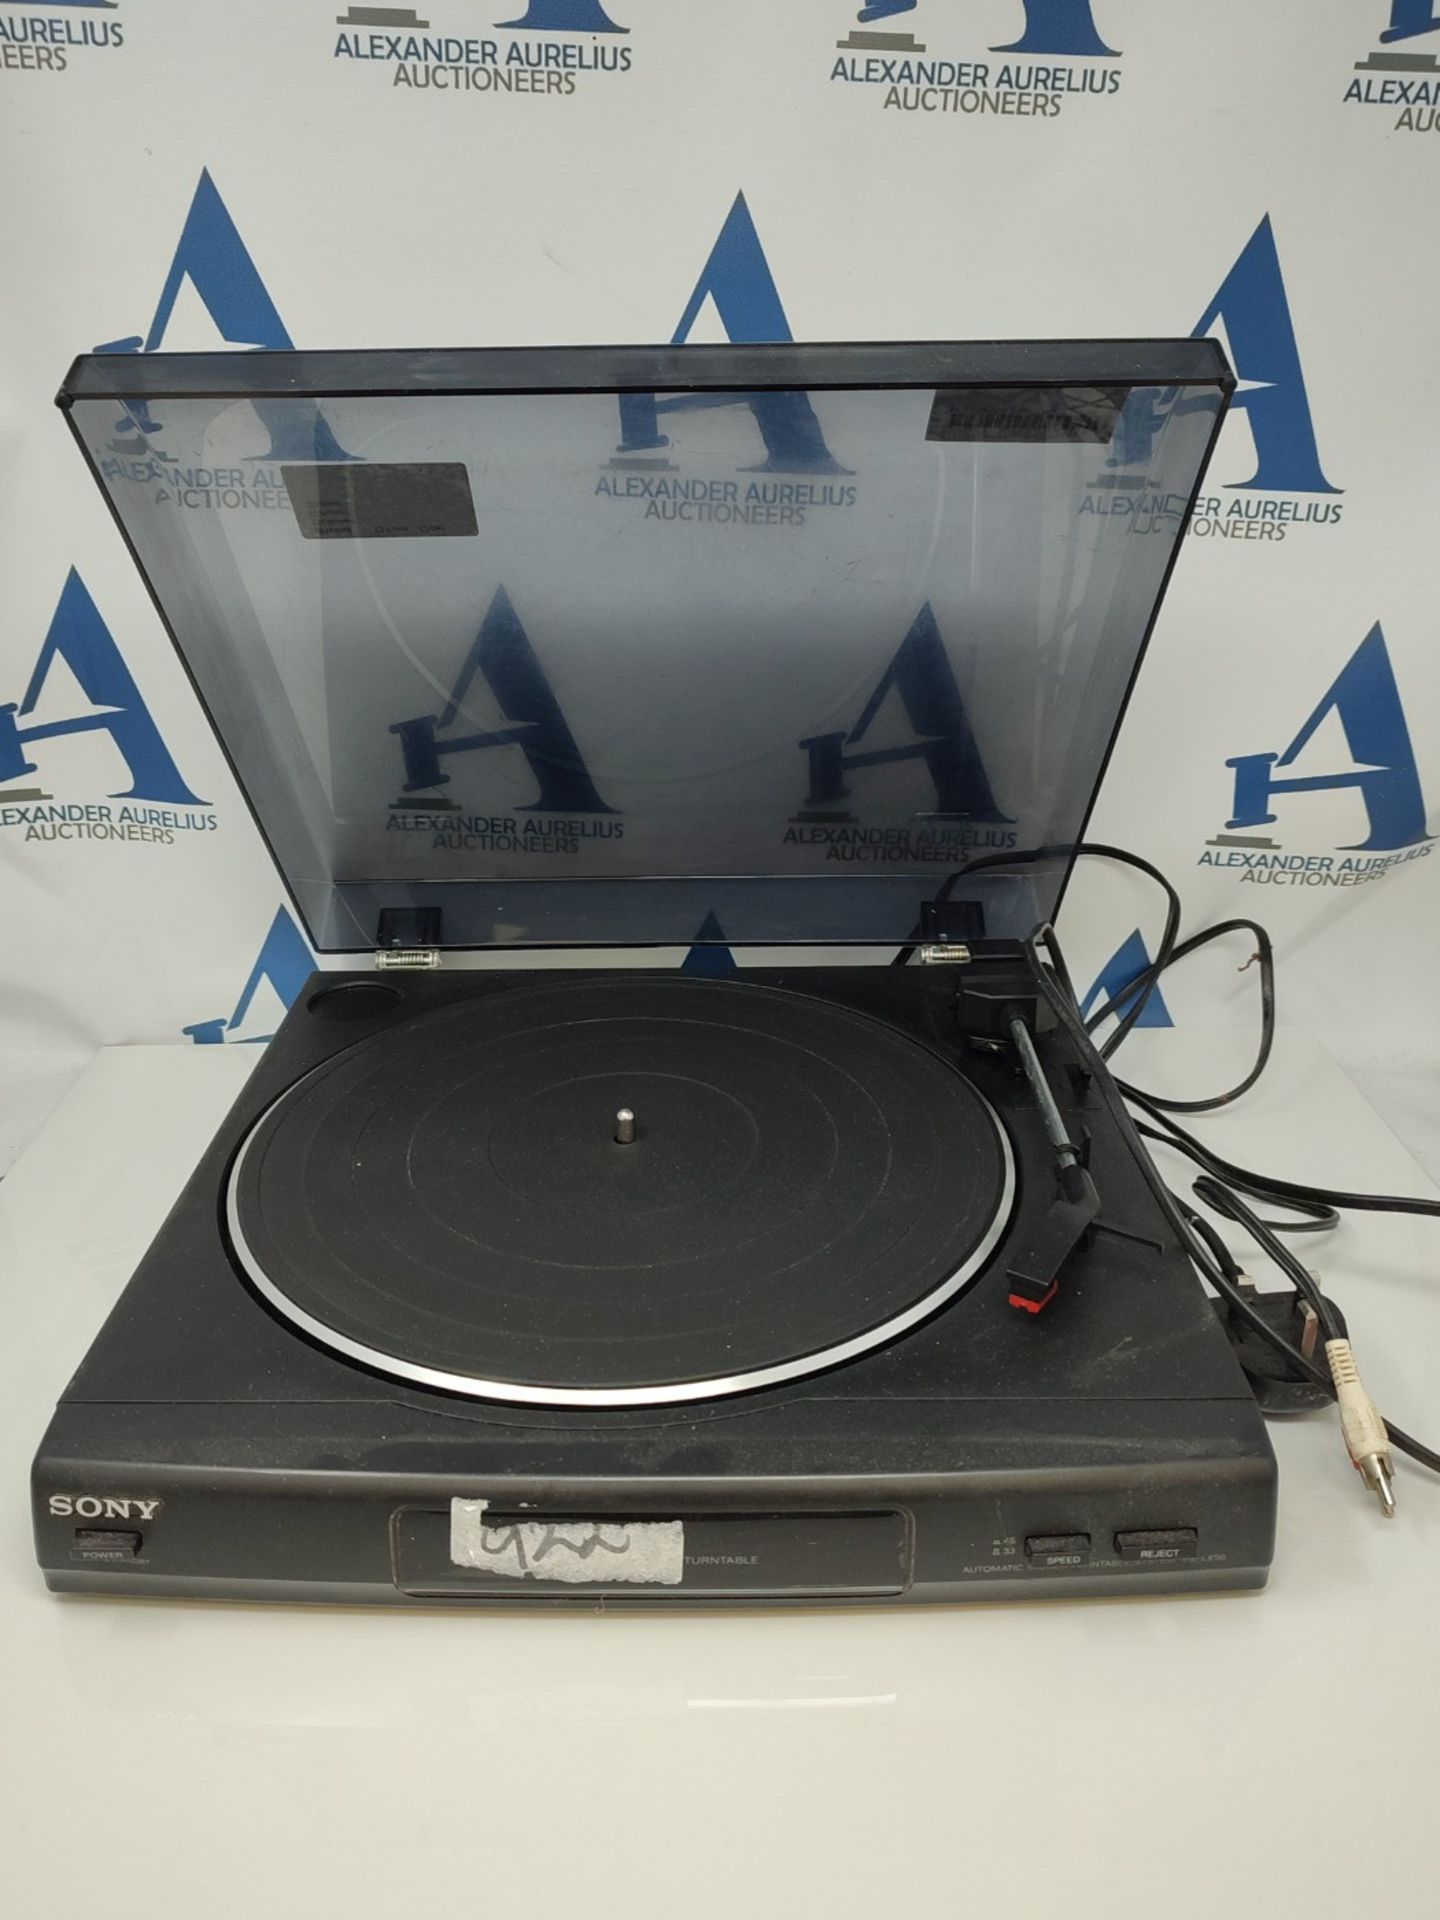 Sony PS-LX56 Stereo Belt Driven Turntable - Black - Image 2 of 2